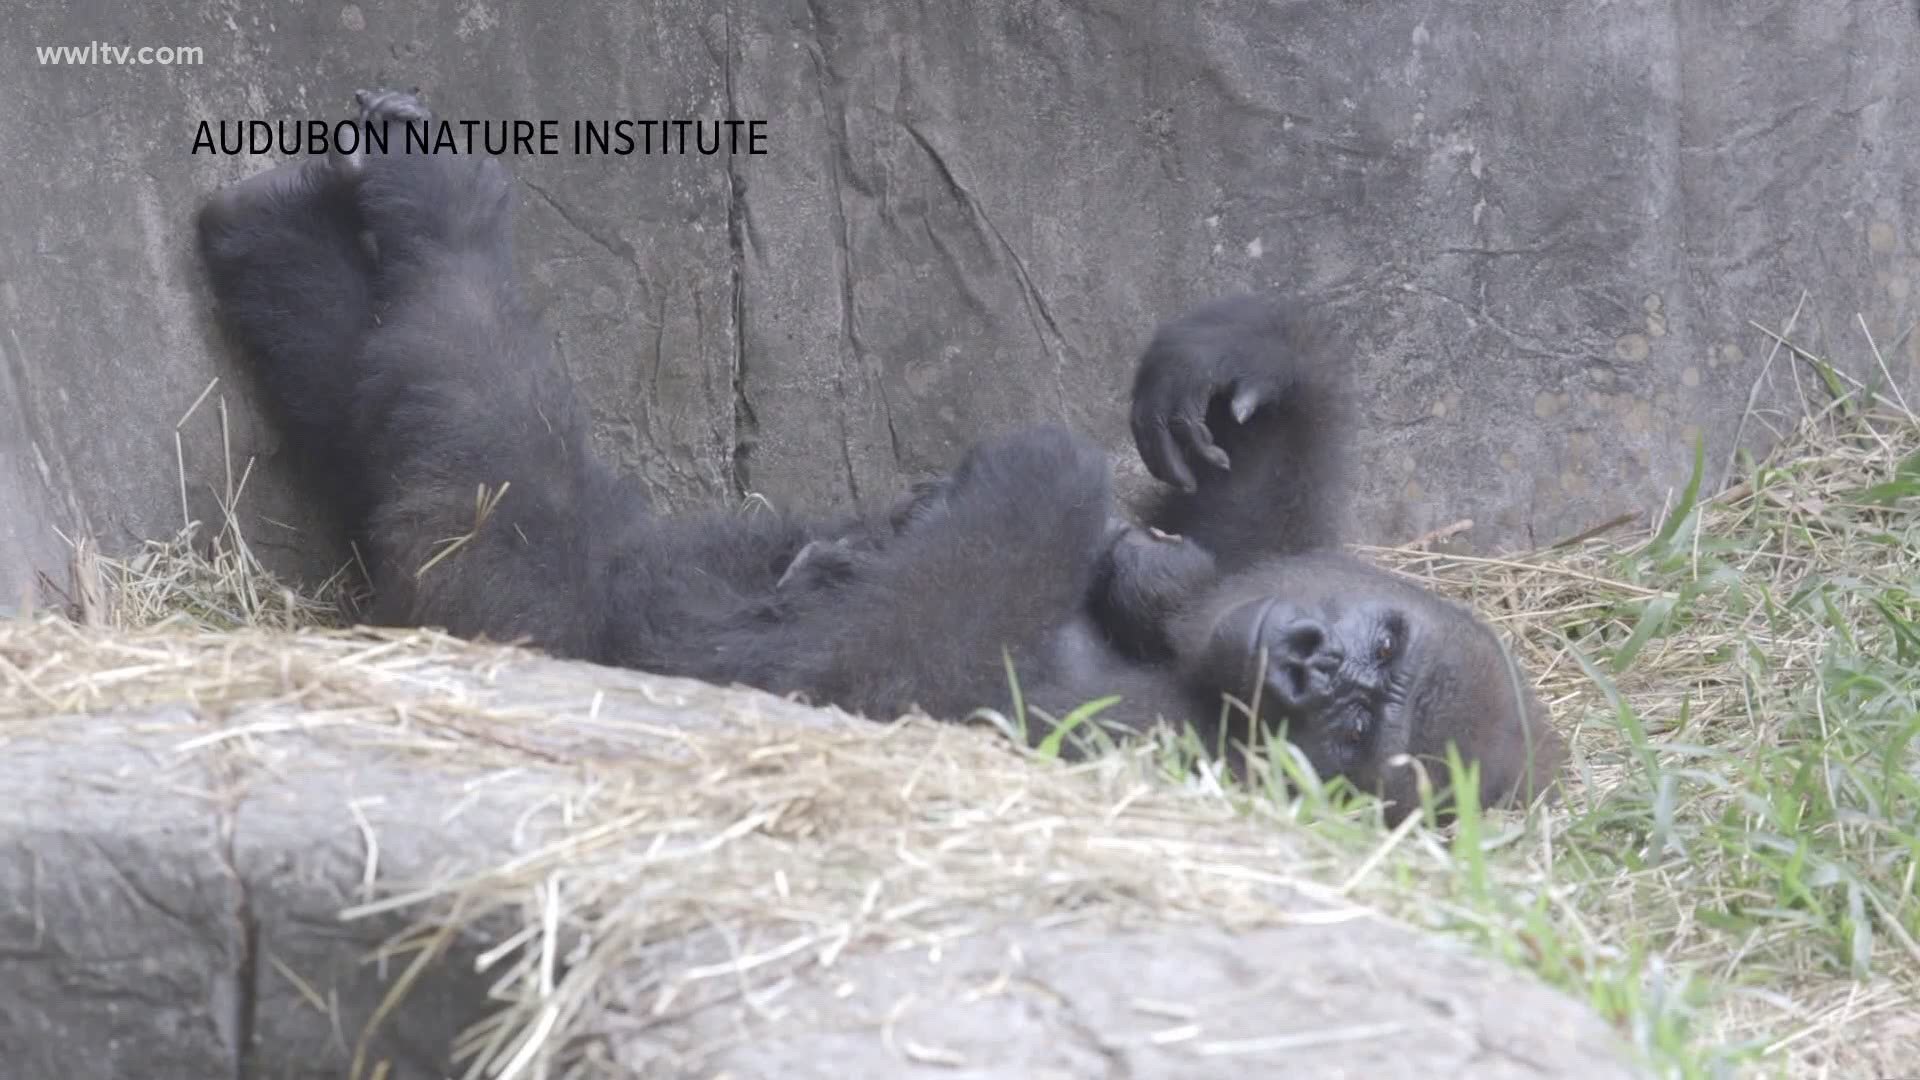 The Audubon Zoo said the six-day-old infant gorilla died Wednesday after staff noticed it seemed lethargic and weak in the arms of its mother, Tumani.